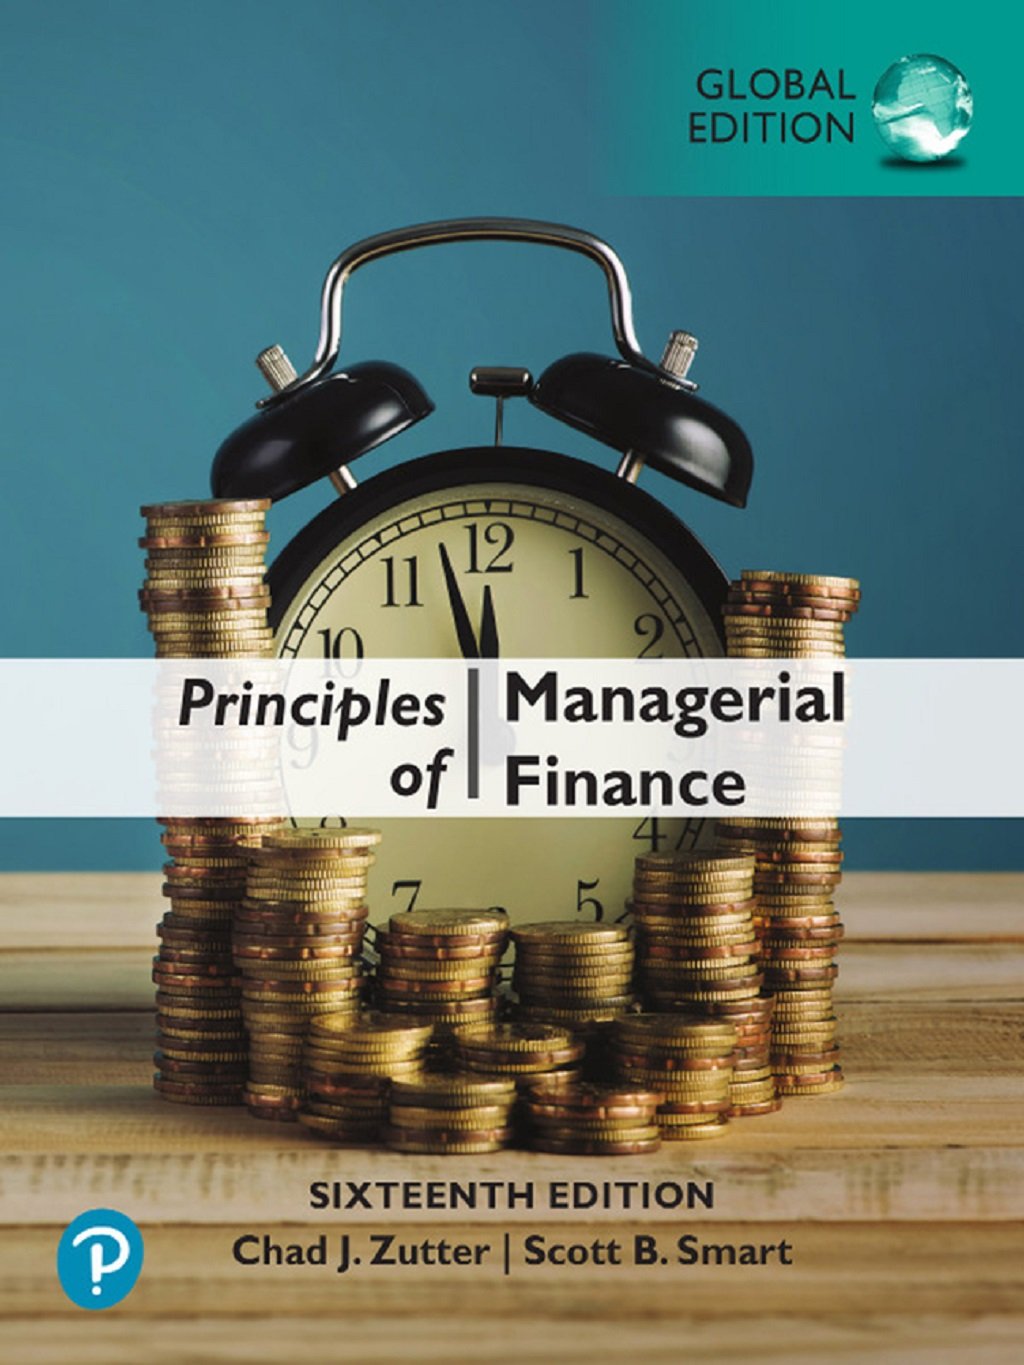 Principles of Managerial Finance, Global Edition, 16th Edition